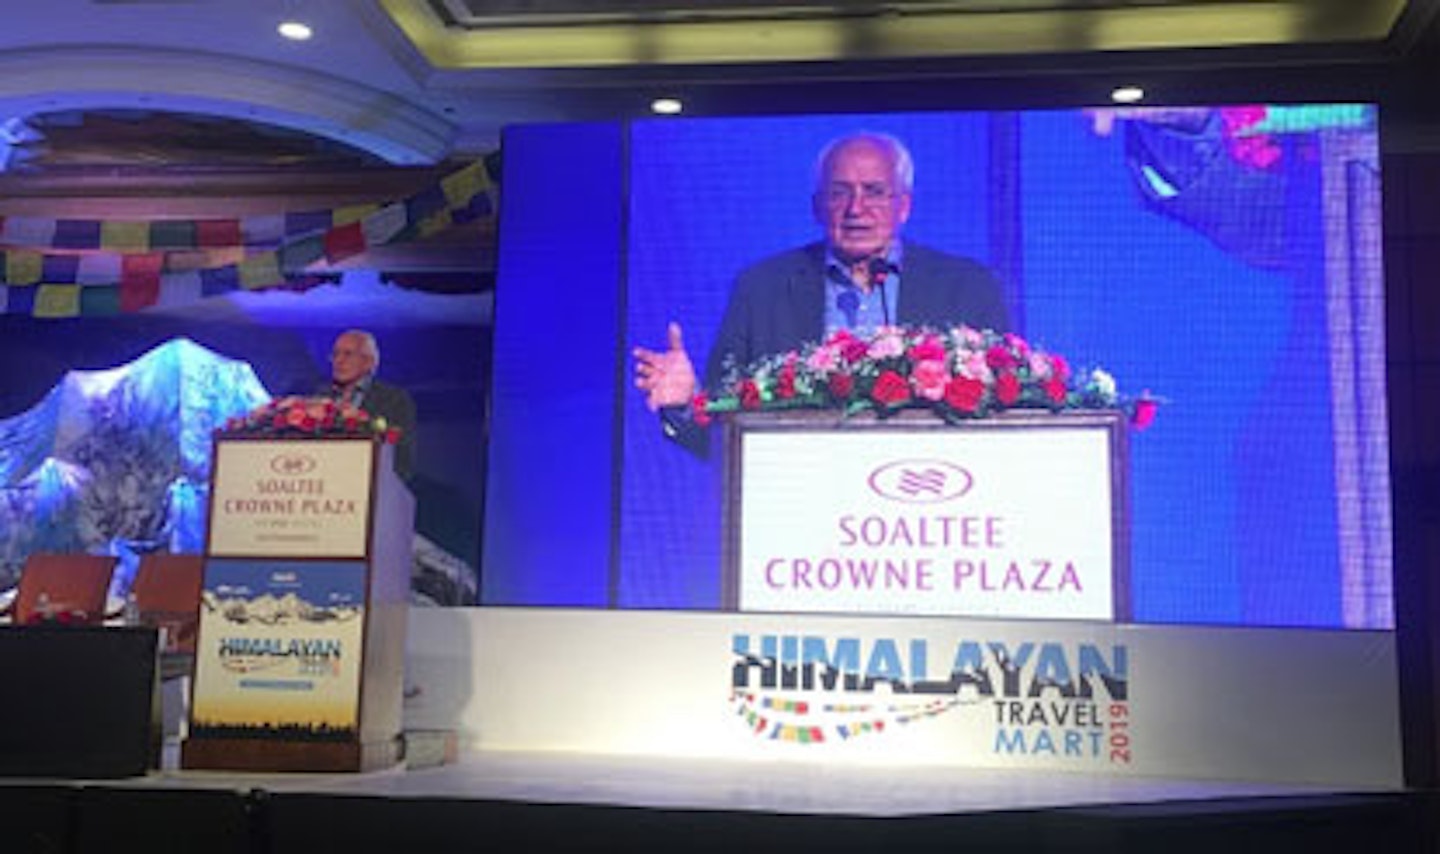 Doug Scott delivering his ‘Lure of the Himalaya’ speech in Kathmandu on 6 June 2019. Photo © Claire Souch 